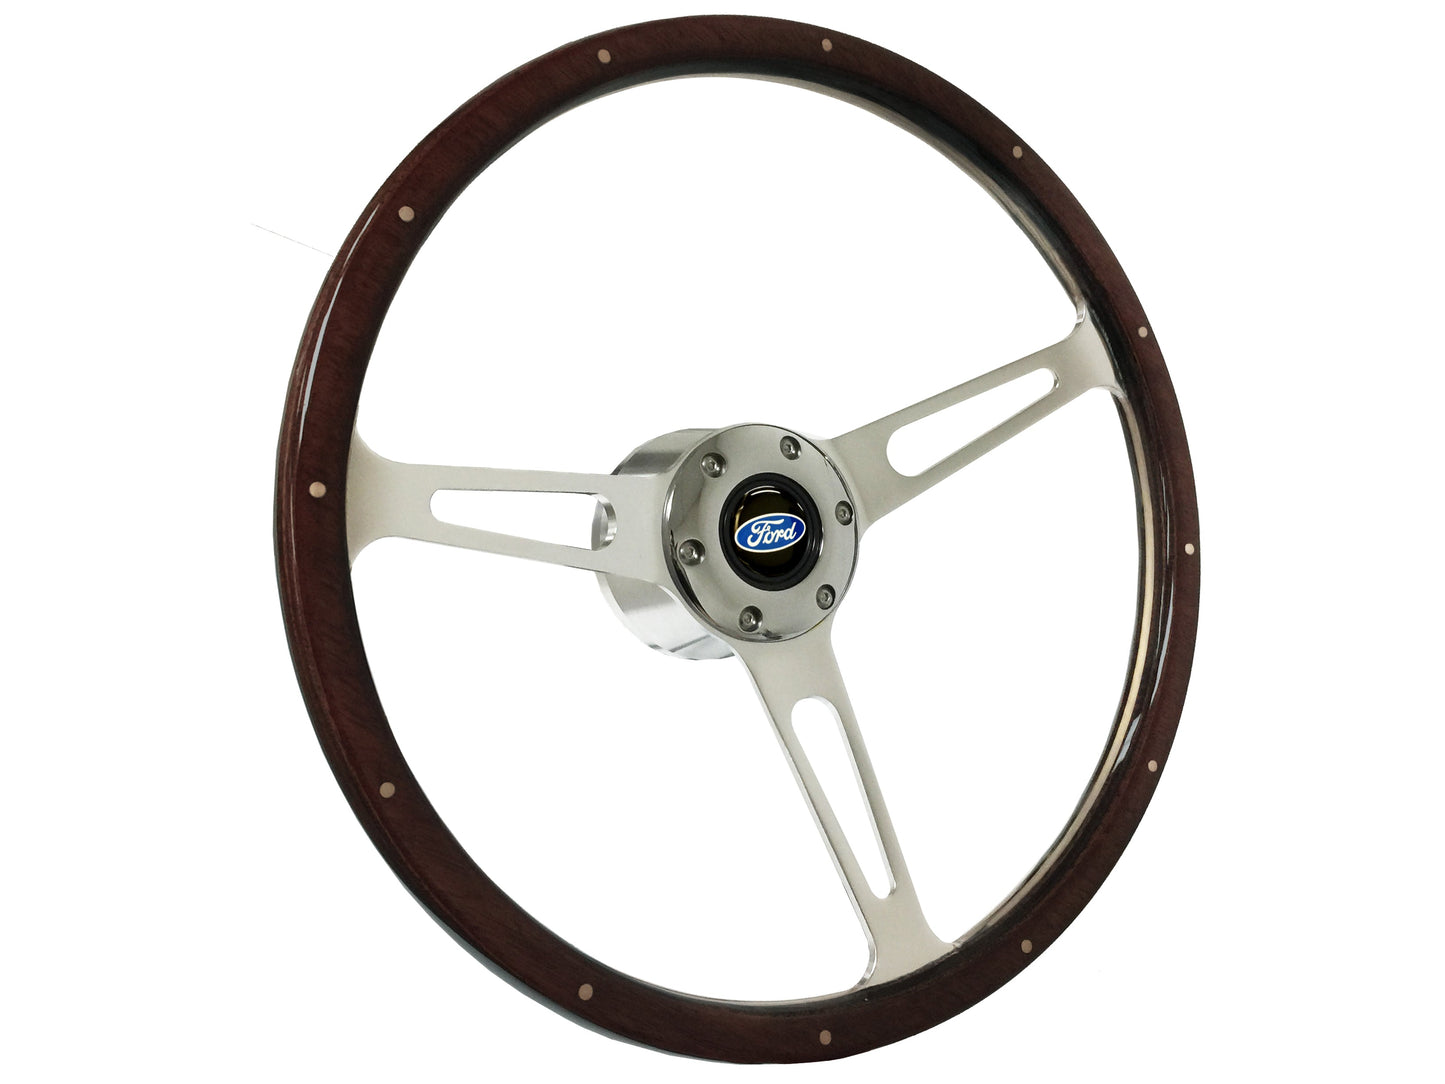 1965-69 Ford Falcon Steering Wheel Kit | Deluxe Espresso Wood | ST3553A